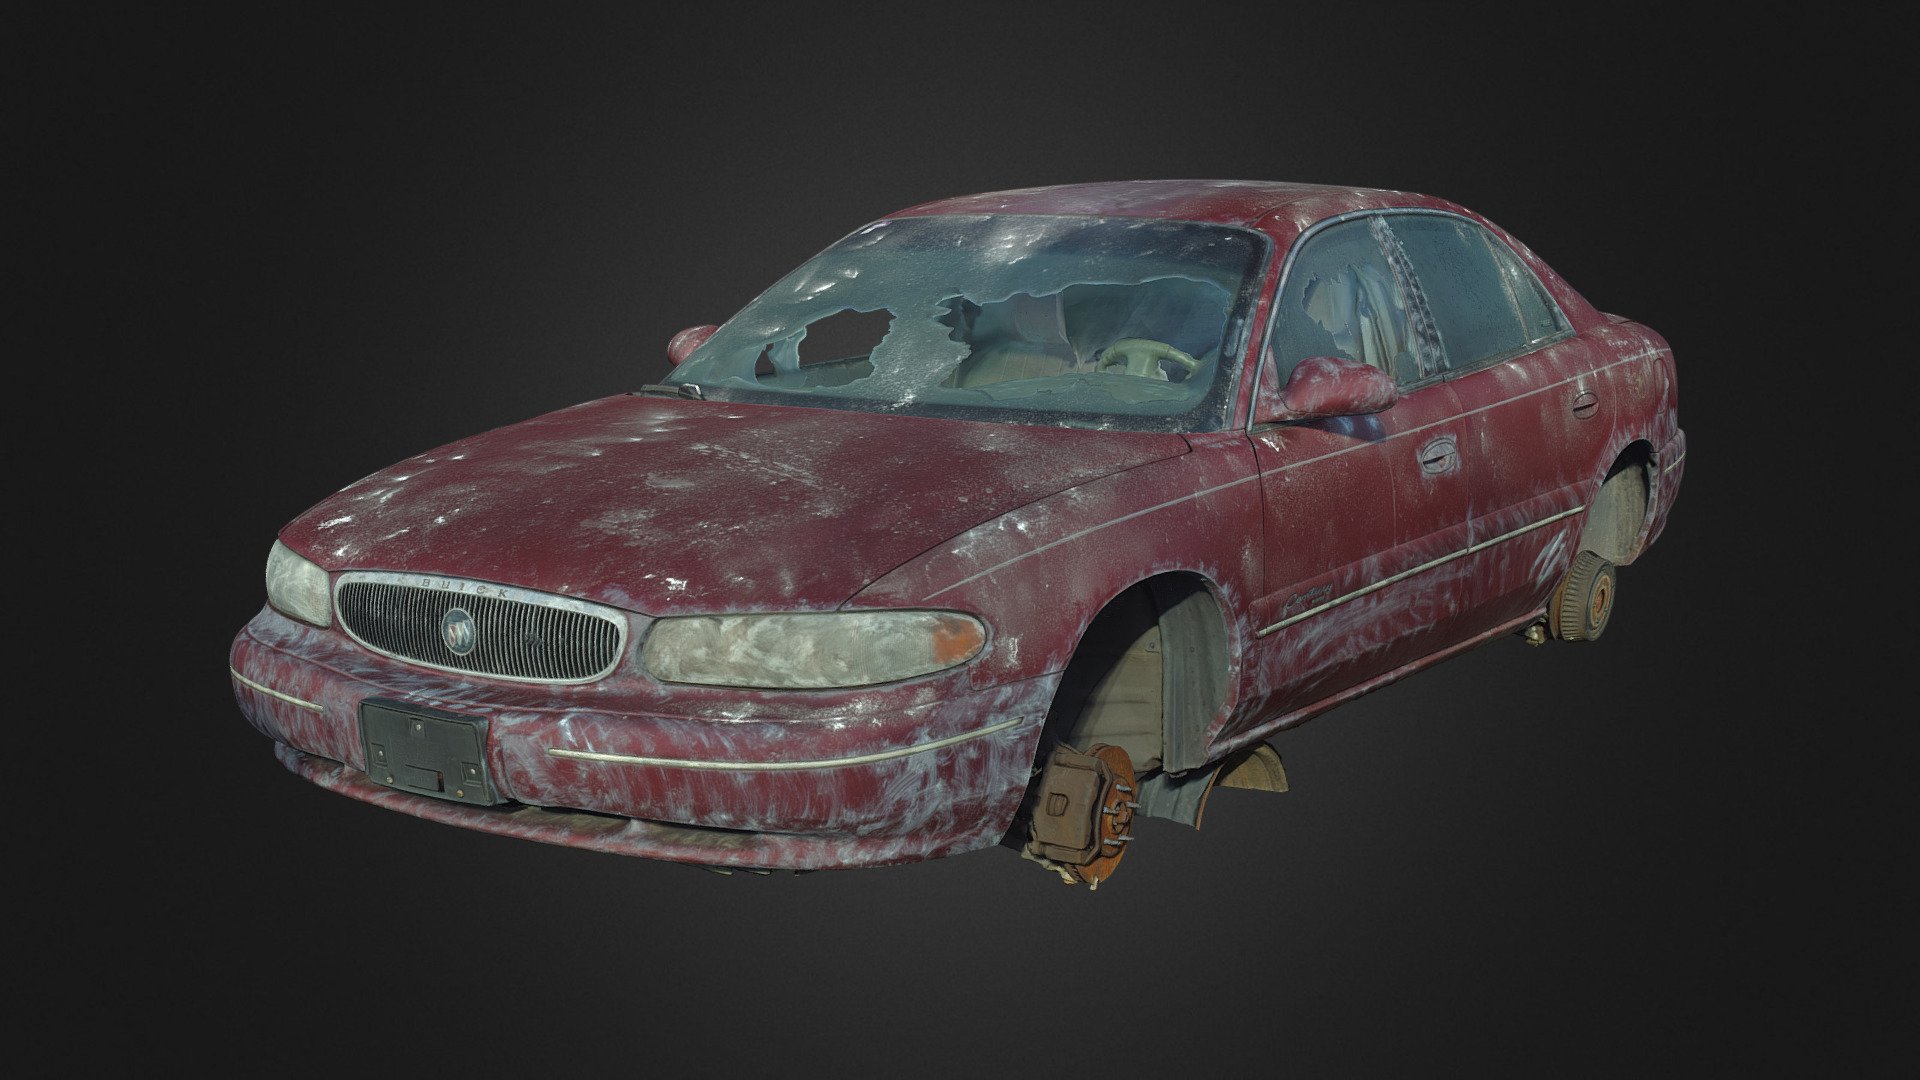 High-accuracy photoscan Intended for use as modeling reference.

Photos taken with my Nikon D3400 and polarizing filter

Created in RealityCapture from 4663 images - 1997-2002 Century [Scan] - 3D model by Rush_Freak 3d model